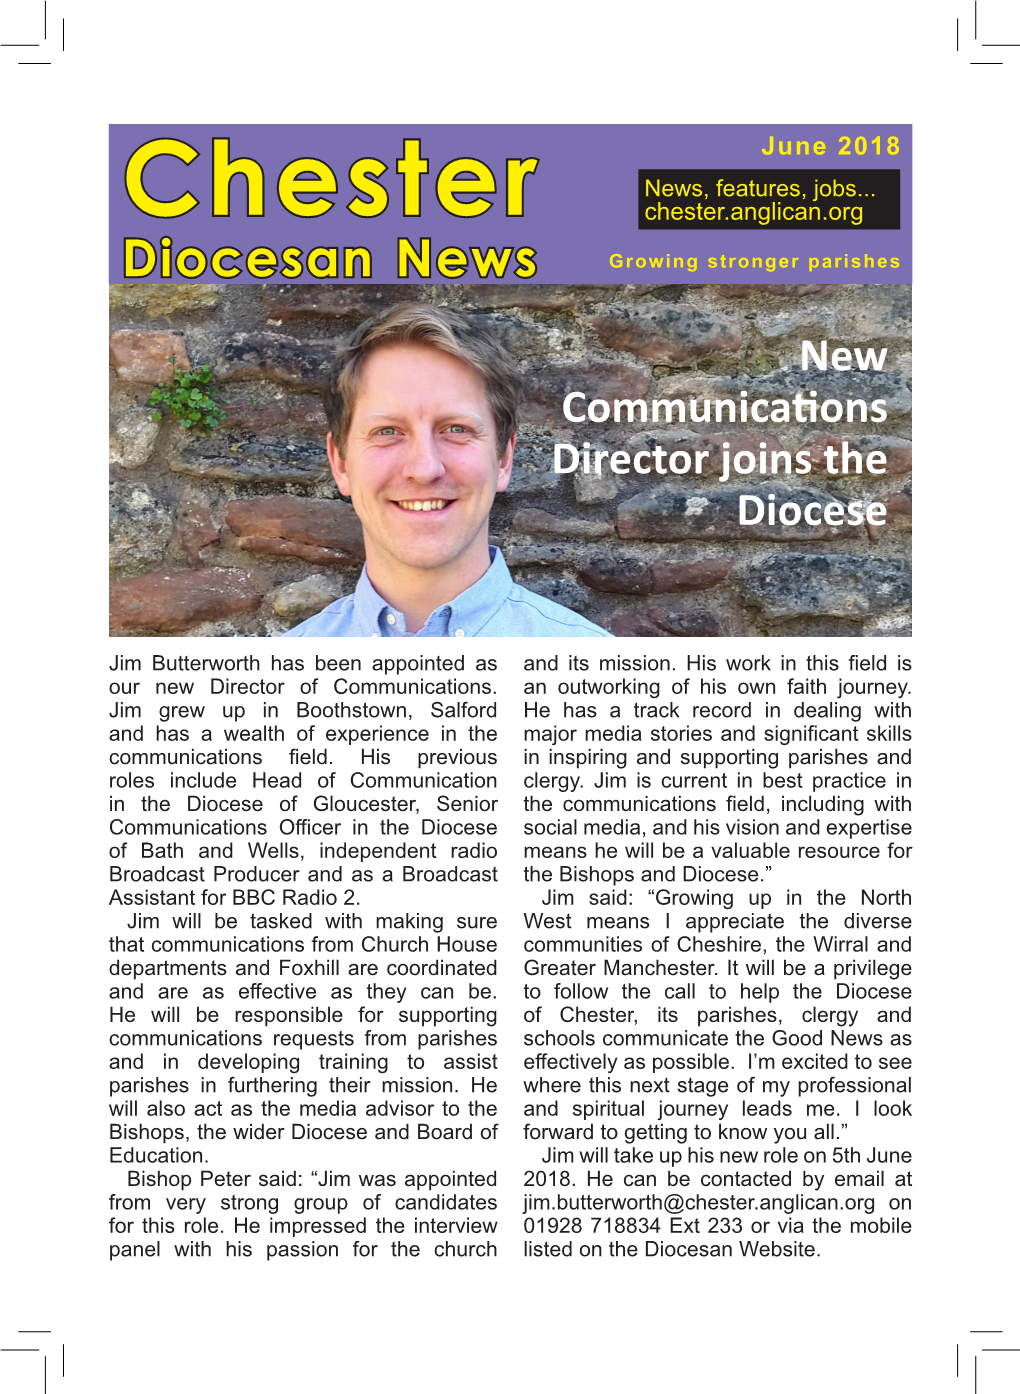 Chester Chester.Anglican.Org Diocesan News Growing Stronger Parishes